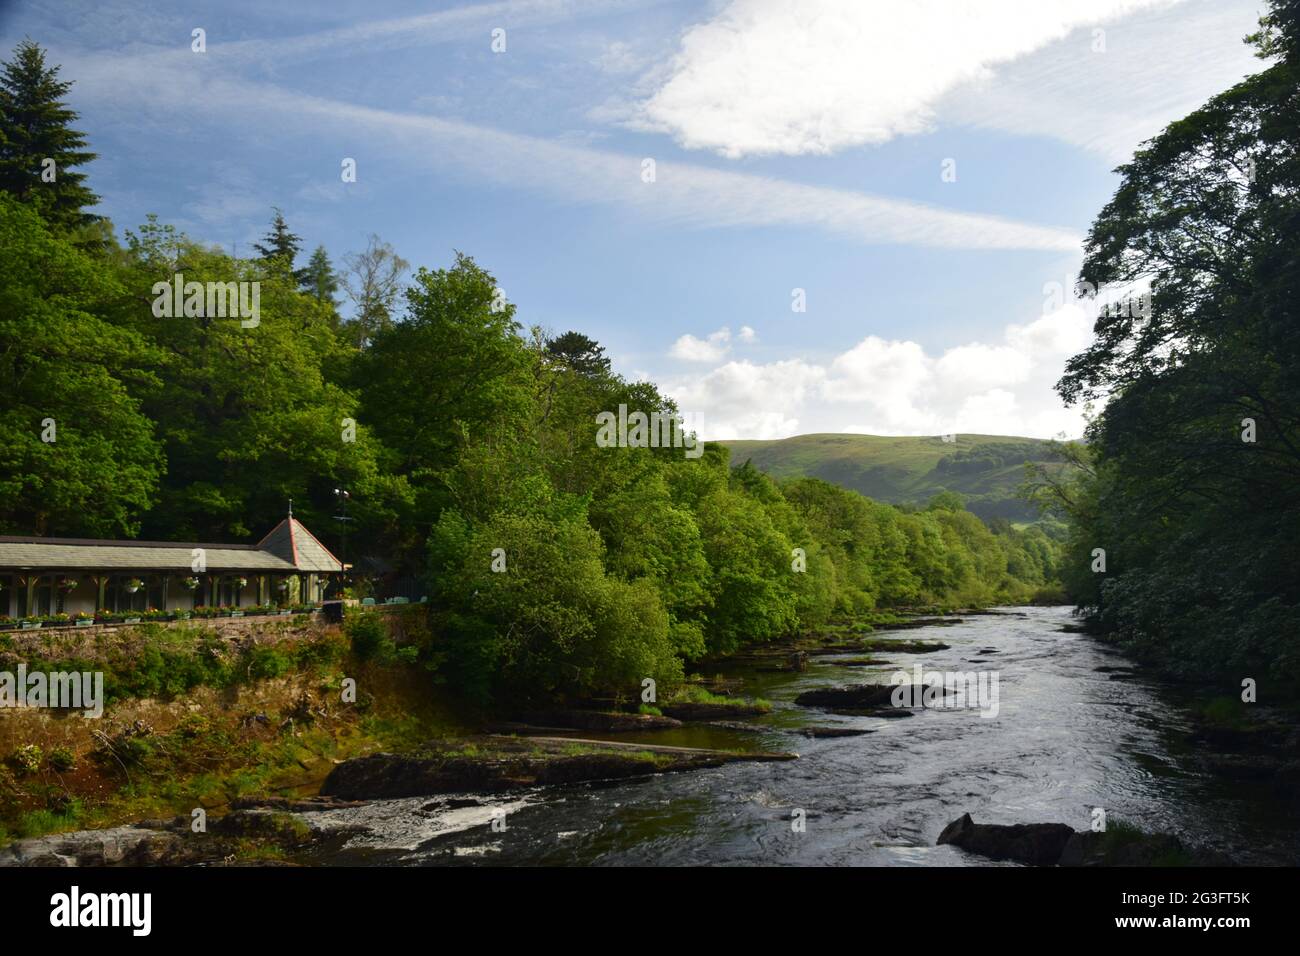 Summer scenes on the River Dee close to Llangollen, Denbighshire. Showing cattle at waters edge, the chain bridge and shore line. Stock Photo